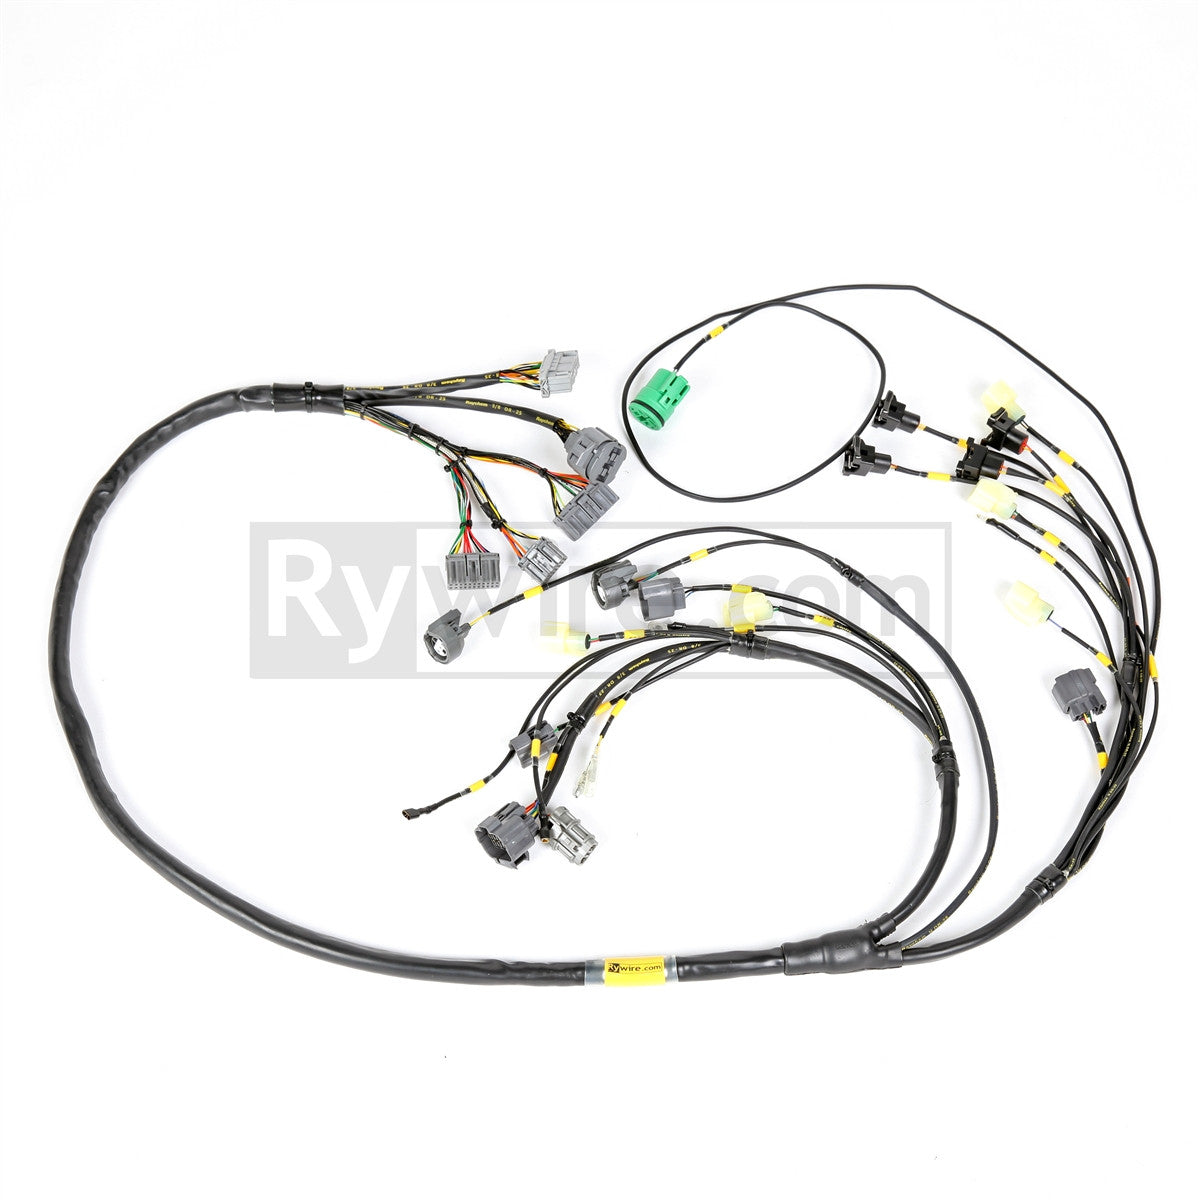 Rywire Mil-Spec F/H-Series Tucked Engine Harness (w/o Quick Disconnect)